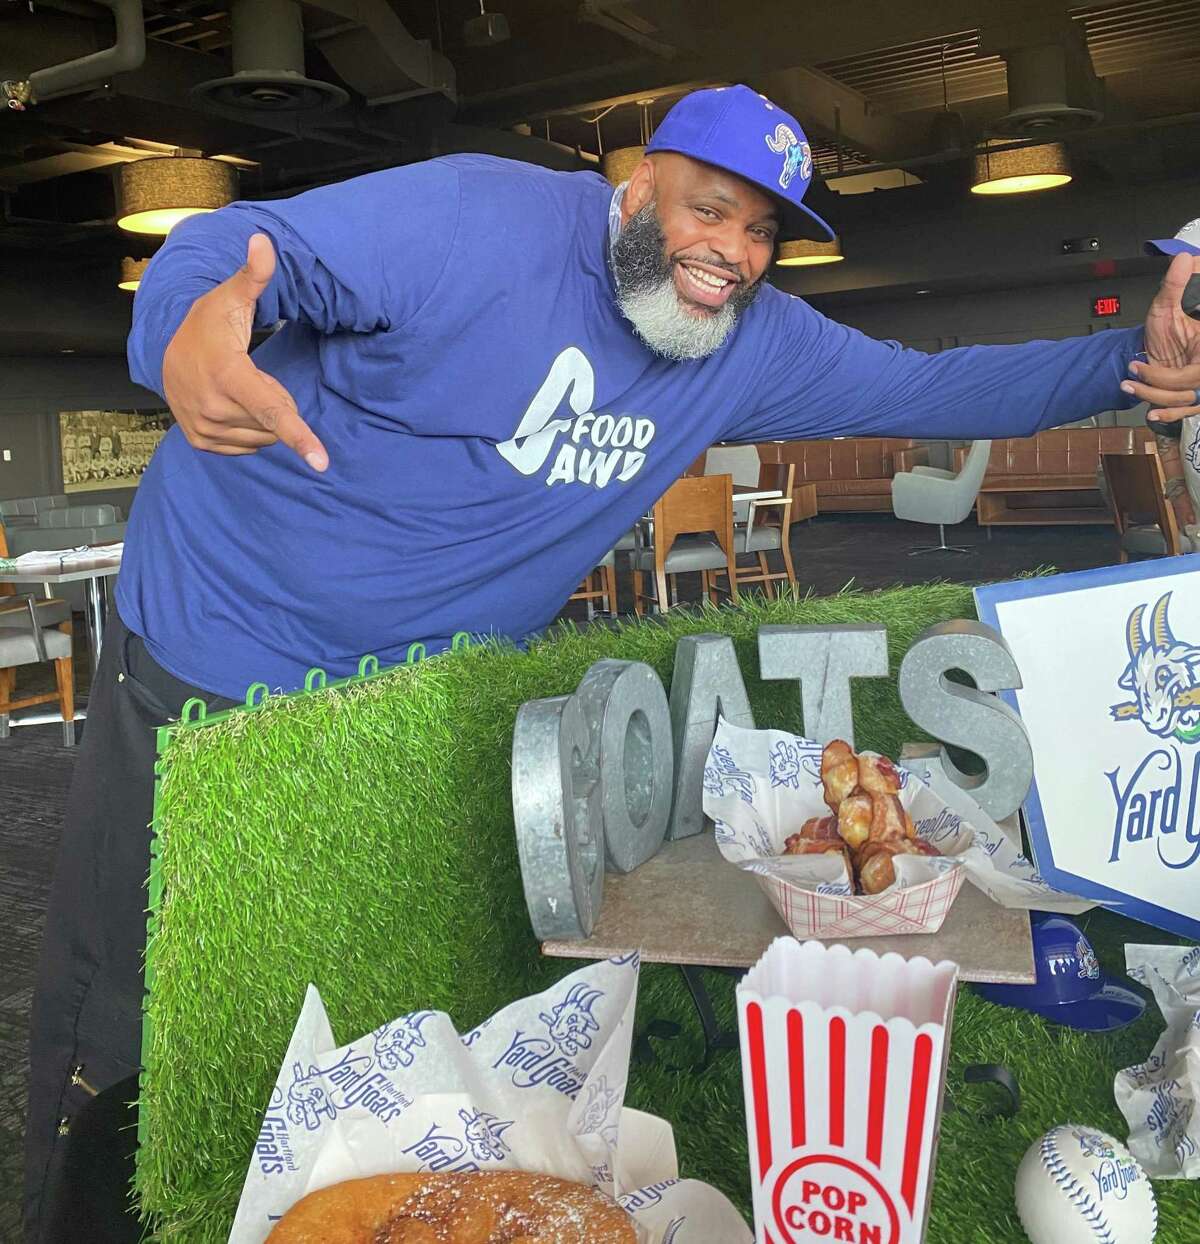 “May 11 is about to get extremely crazy for everyone who’s been waiting for Hartford Yard Goats to open up here at Dunkin’ Donuts Park,” Patterson said. “But what individuals love even more than just baseball is, of course, the food. You're always looking for that new, that exciting, and that flavor at the end of the day.” “We’re very excited to unveil this,” said Yard Goats president Tim Restall at a media event Thursday. “It’s been years in the making.” Patterson was just as exuberant in person as he showcased some of the items planned for the diner. Here are some highlights: